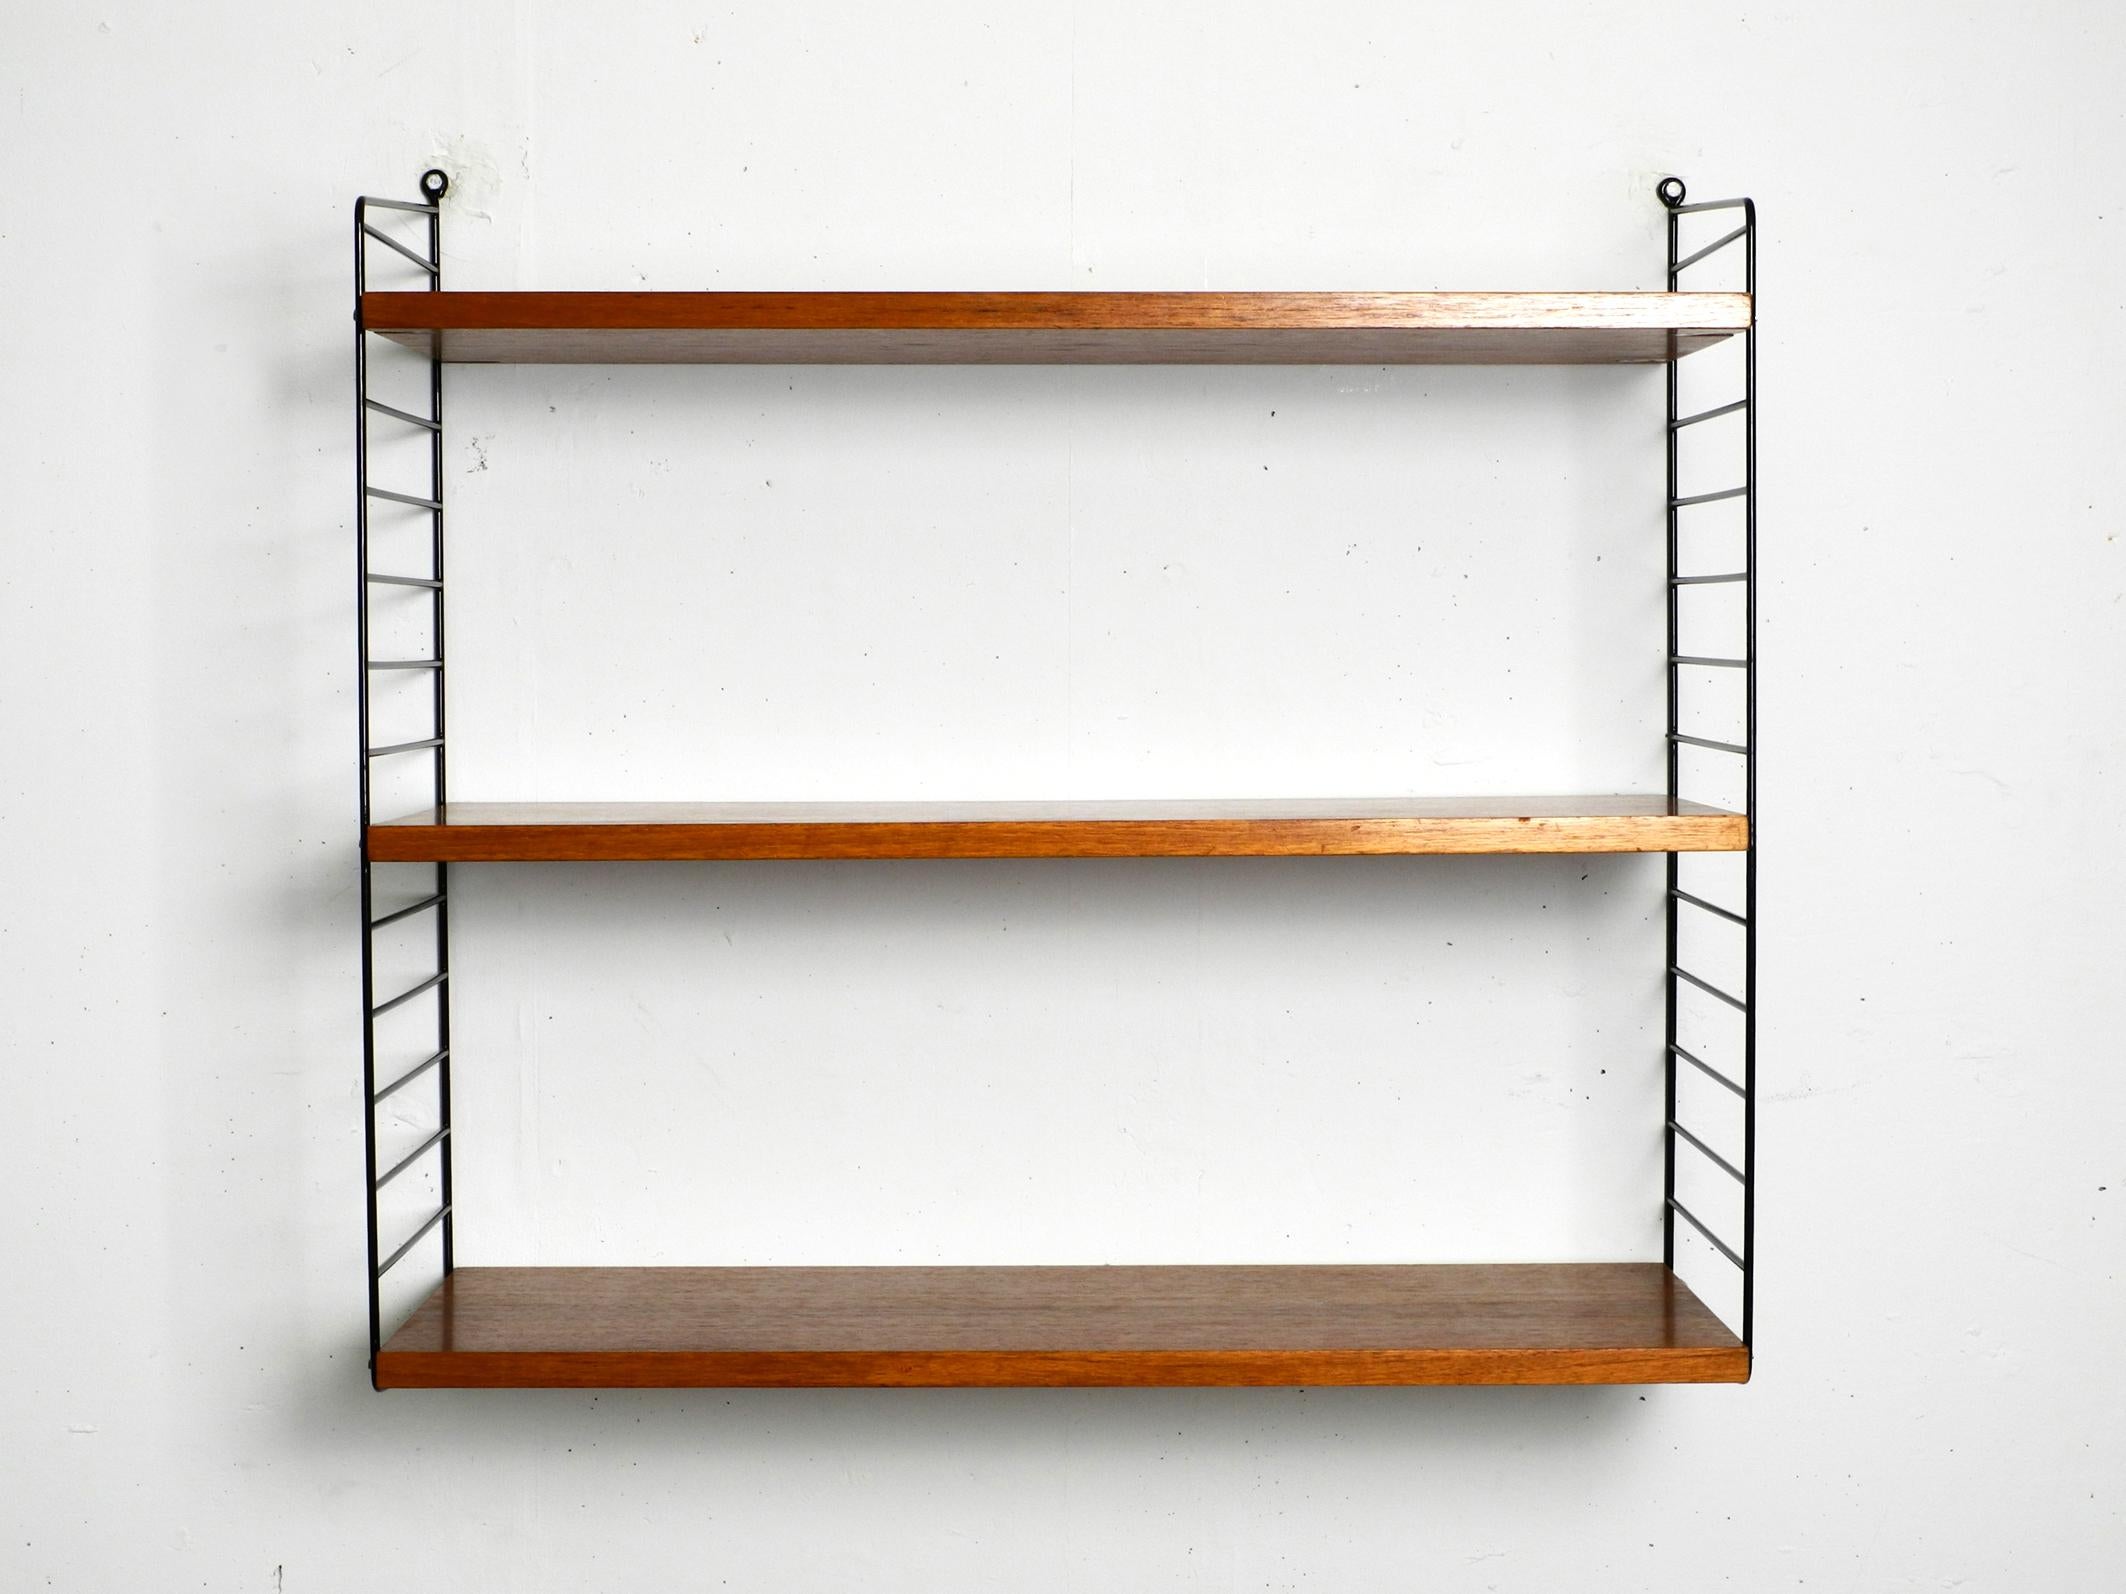 Original 1960s Nisse Strinning wall hanging shelf with three solid wood shelves with teak veneer.
This shelf has the deeper ladder and 30cm deep boards.
2 Metal ladders with black plastic coating.
All two ladders are in good condition. No rust.